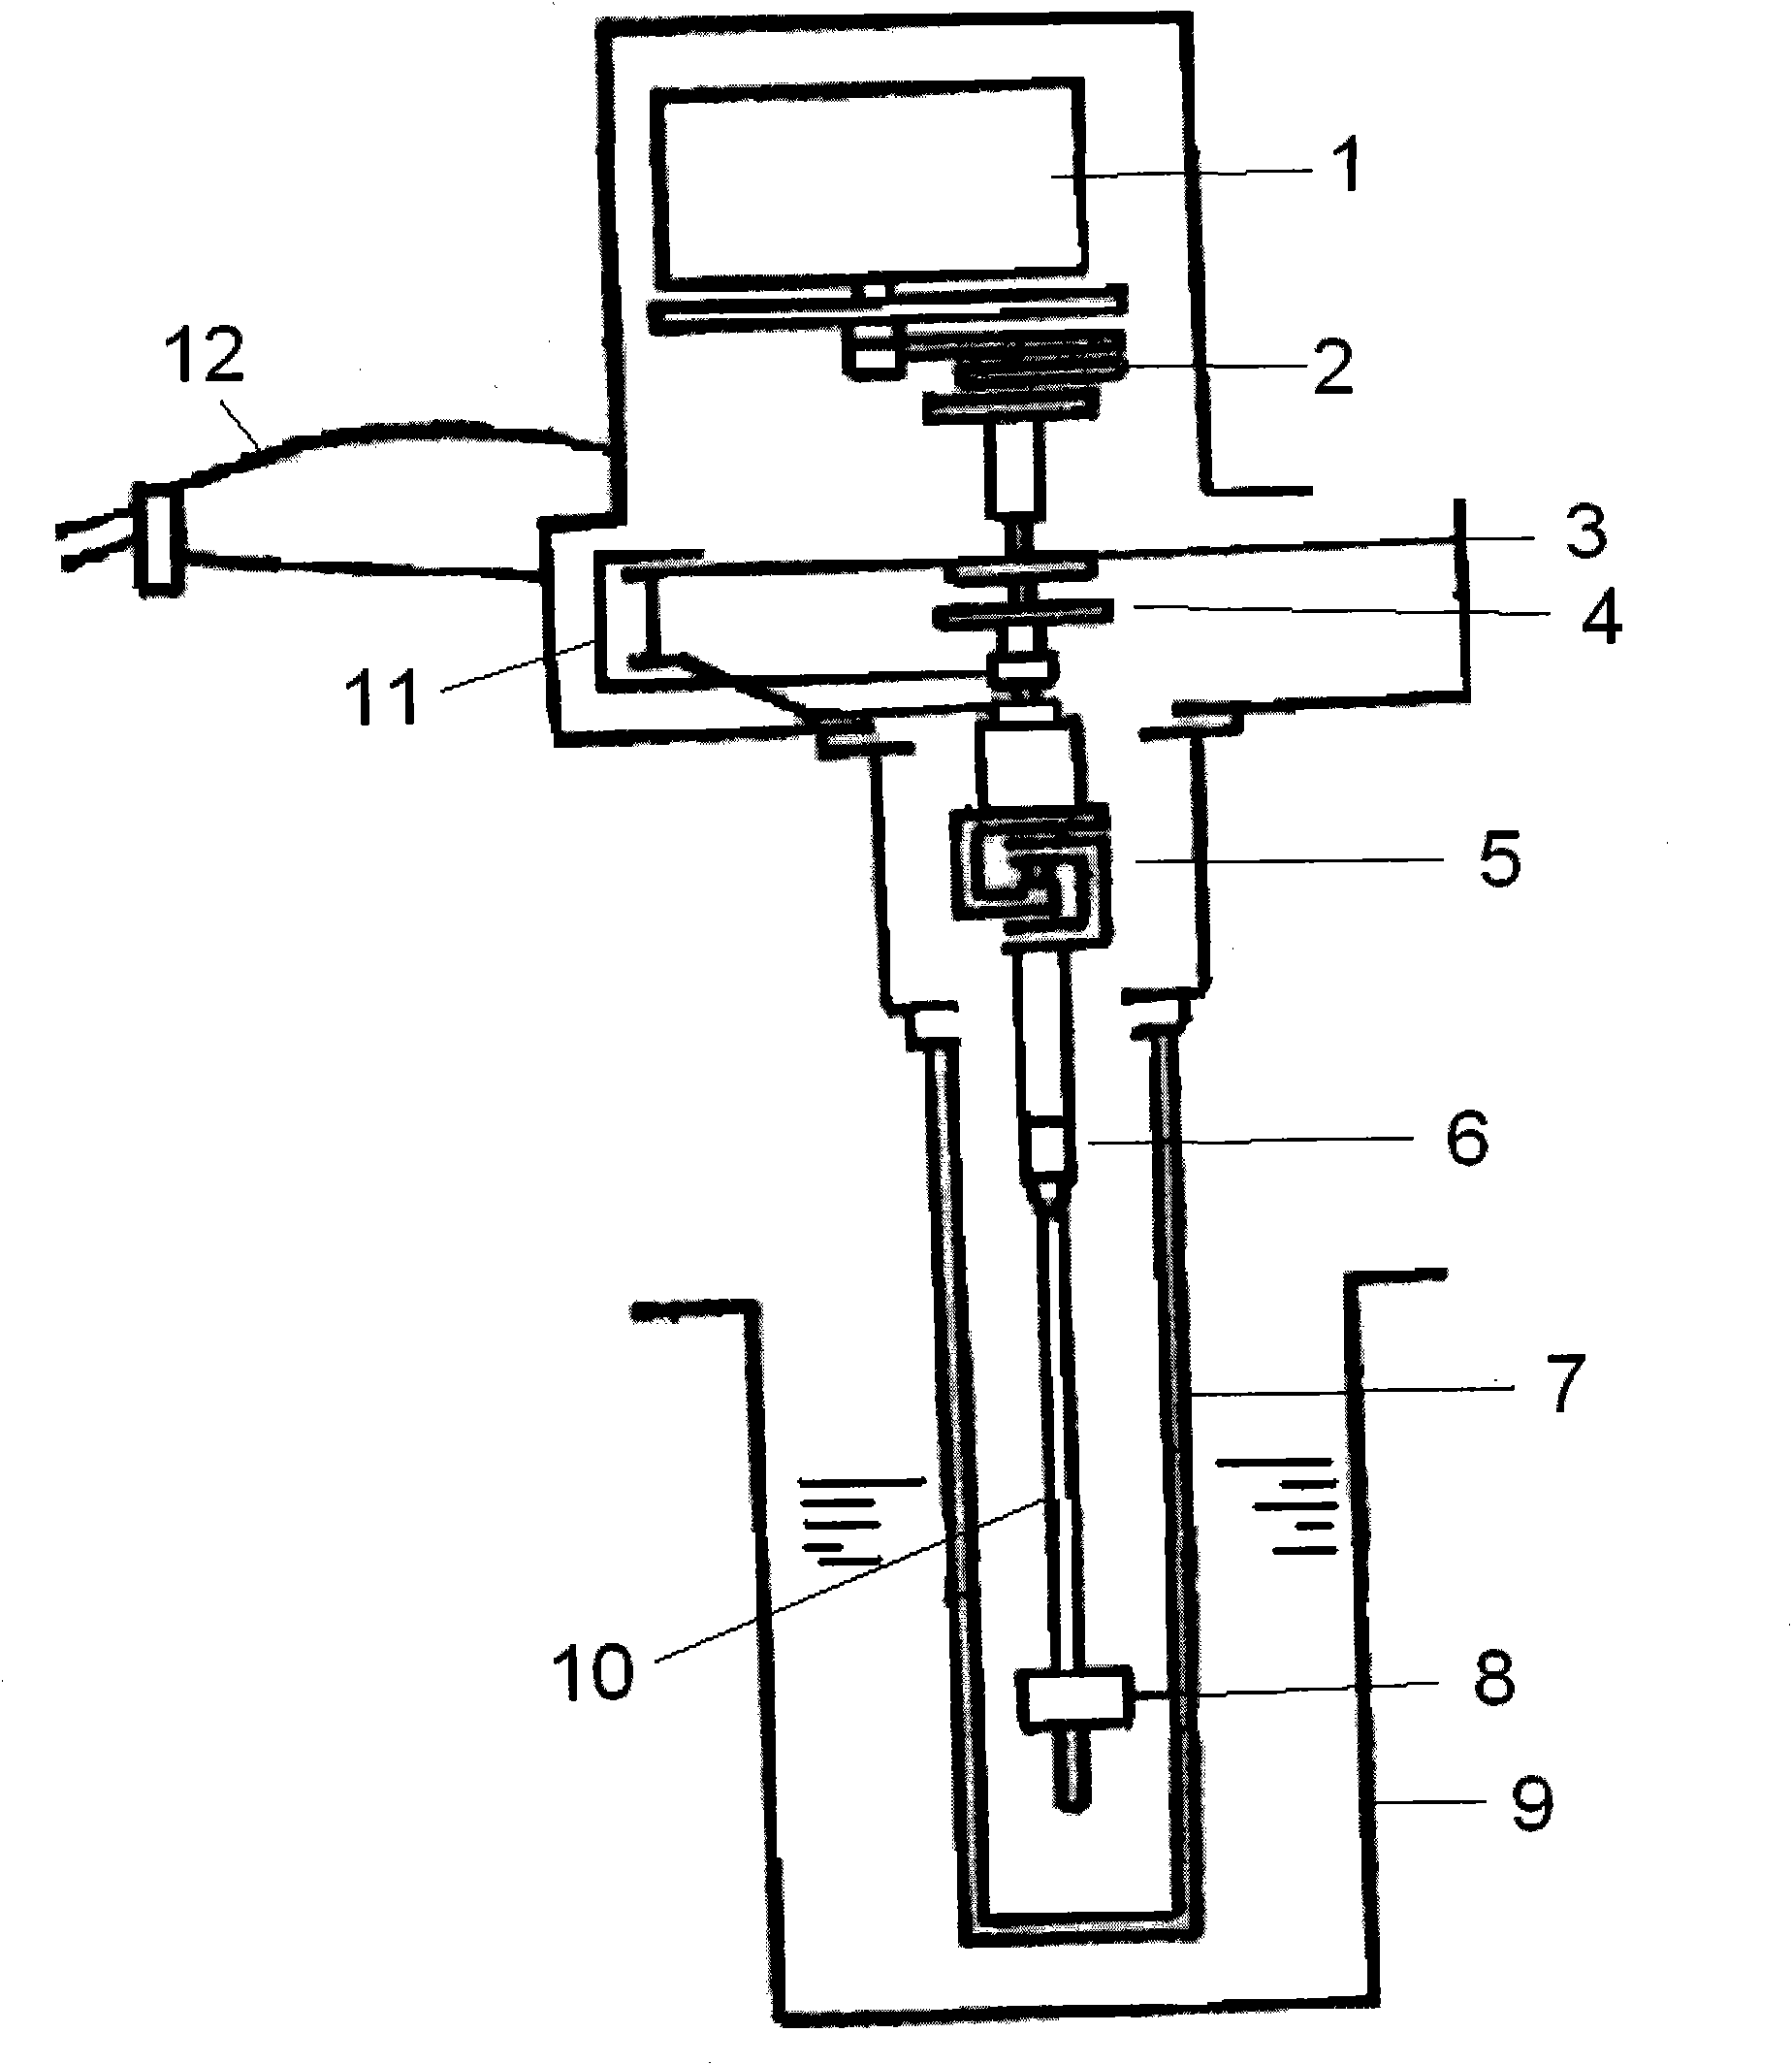 Instrument for measuring rheological property and viscosity of fluid